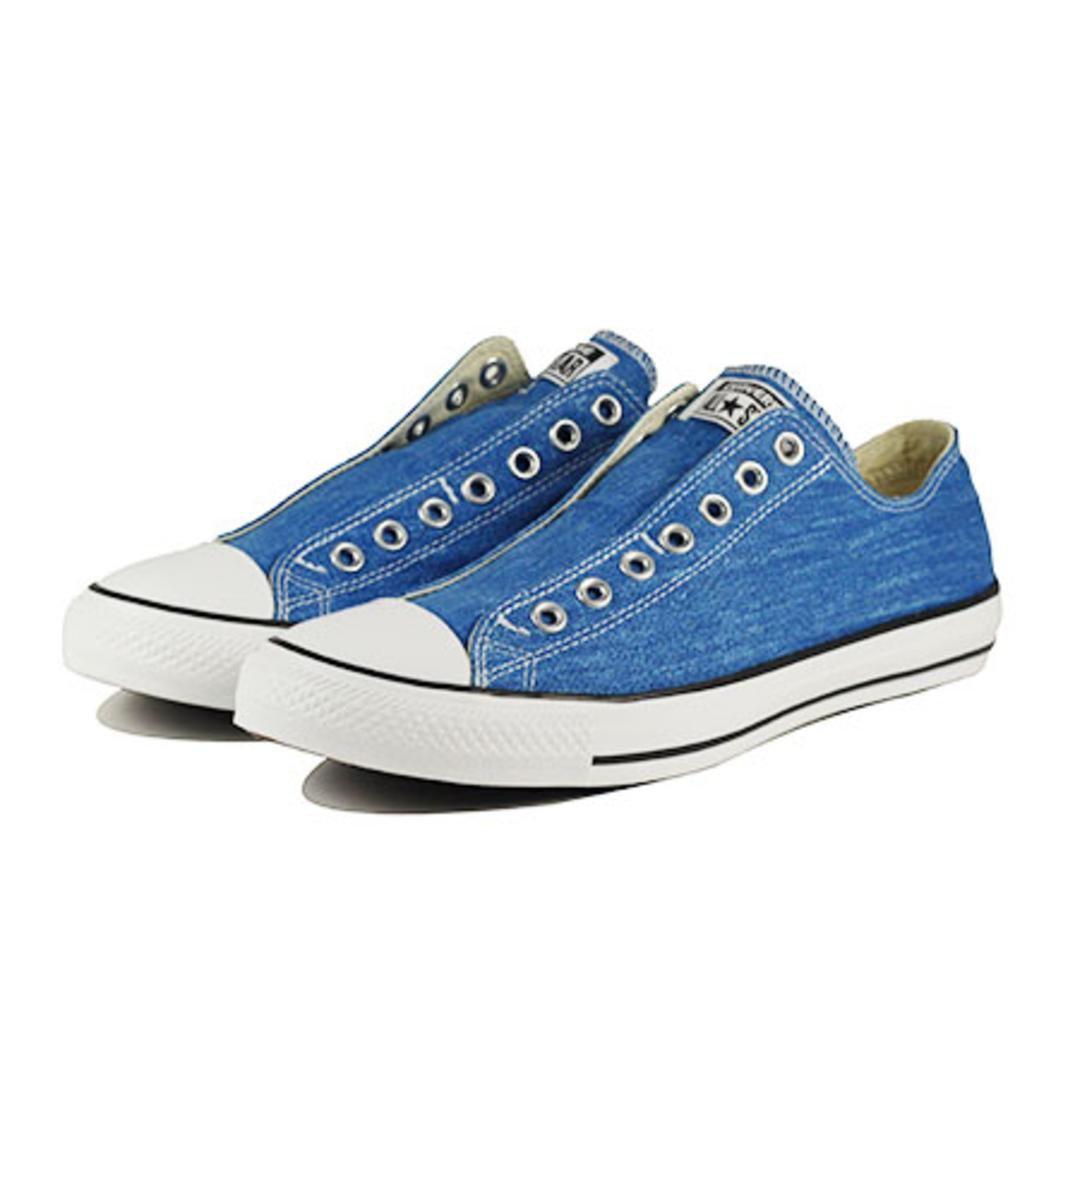 Converse : Chuck Taylor Slip On Vision Blue Sneaker for Men - Lyst